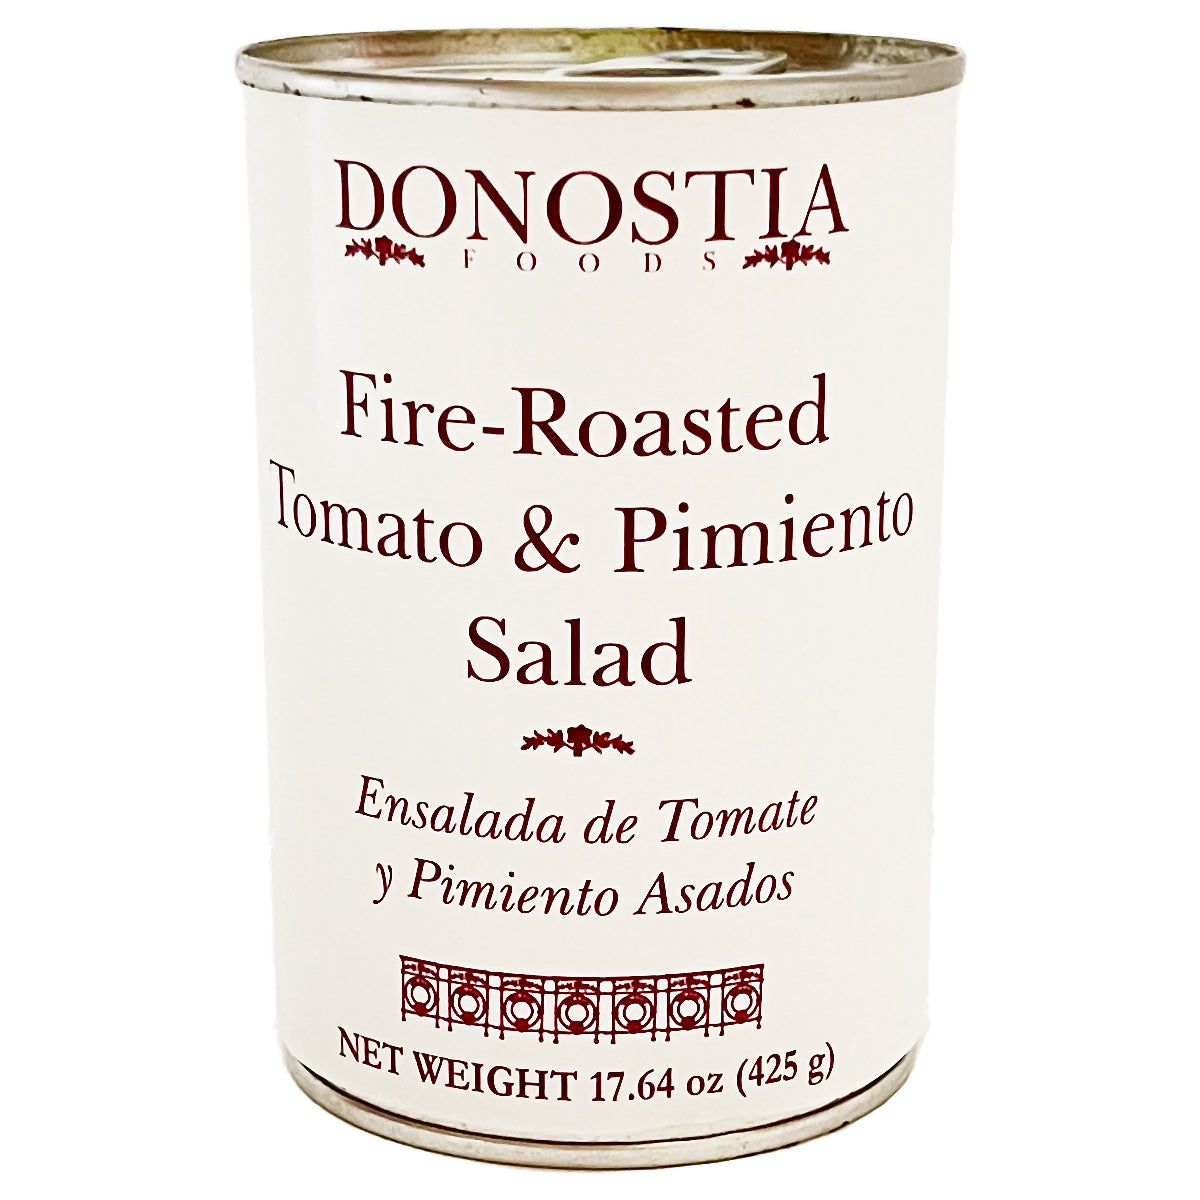 Can of Fire-Roasted Tomato and Pimiento Salad - Donostia Foods